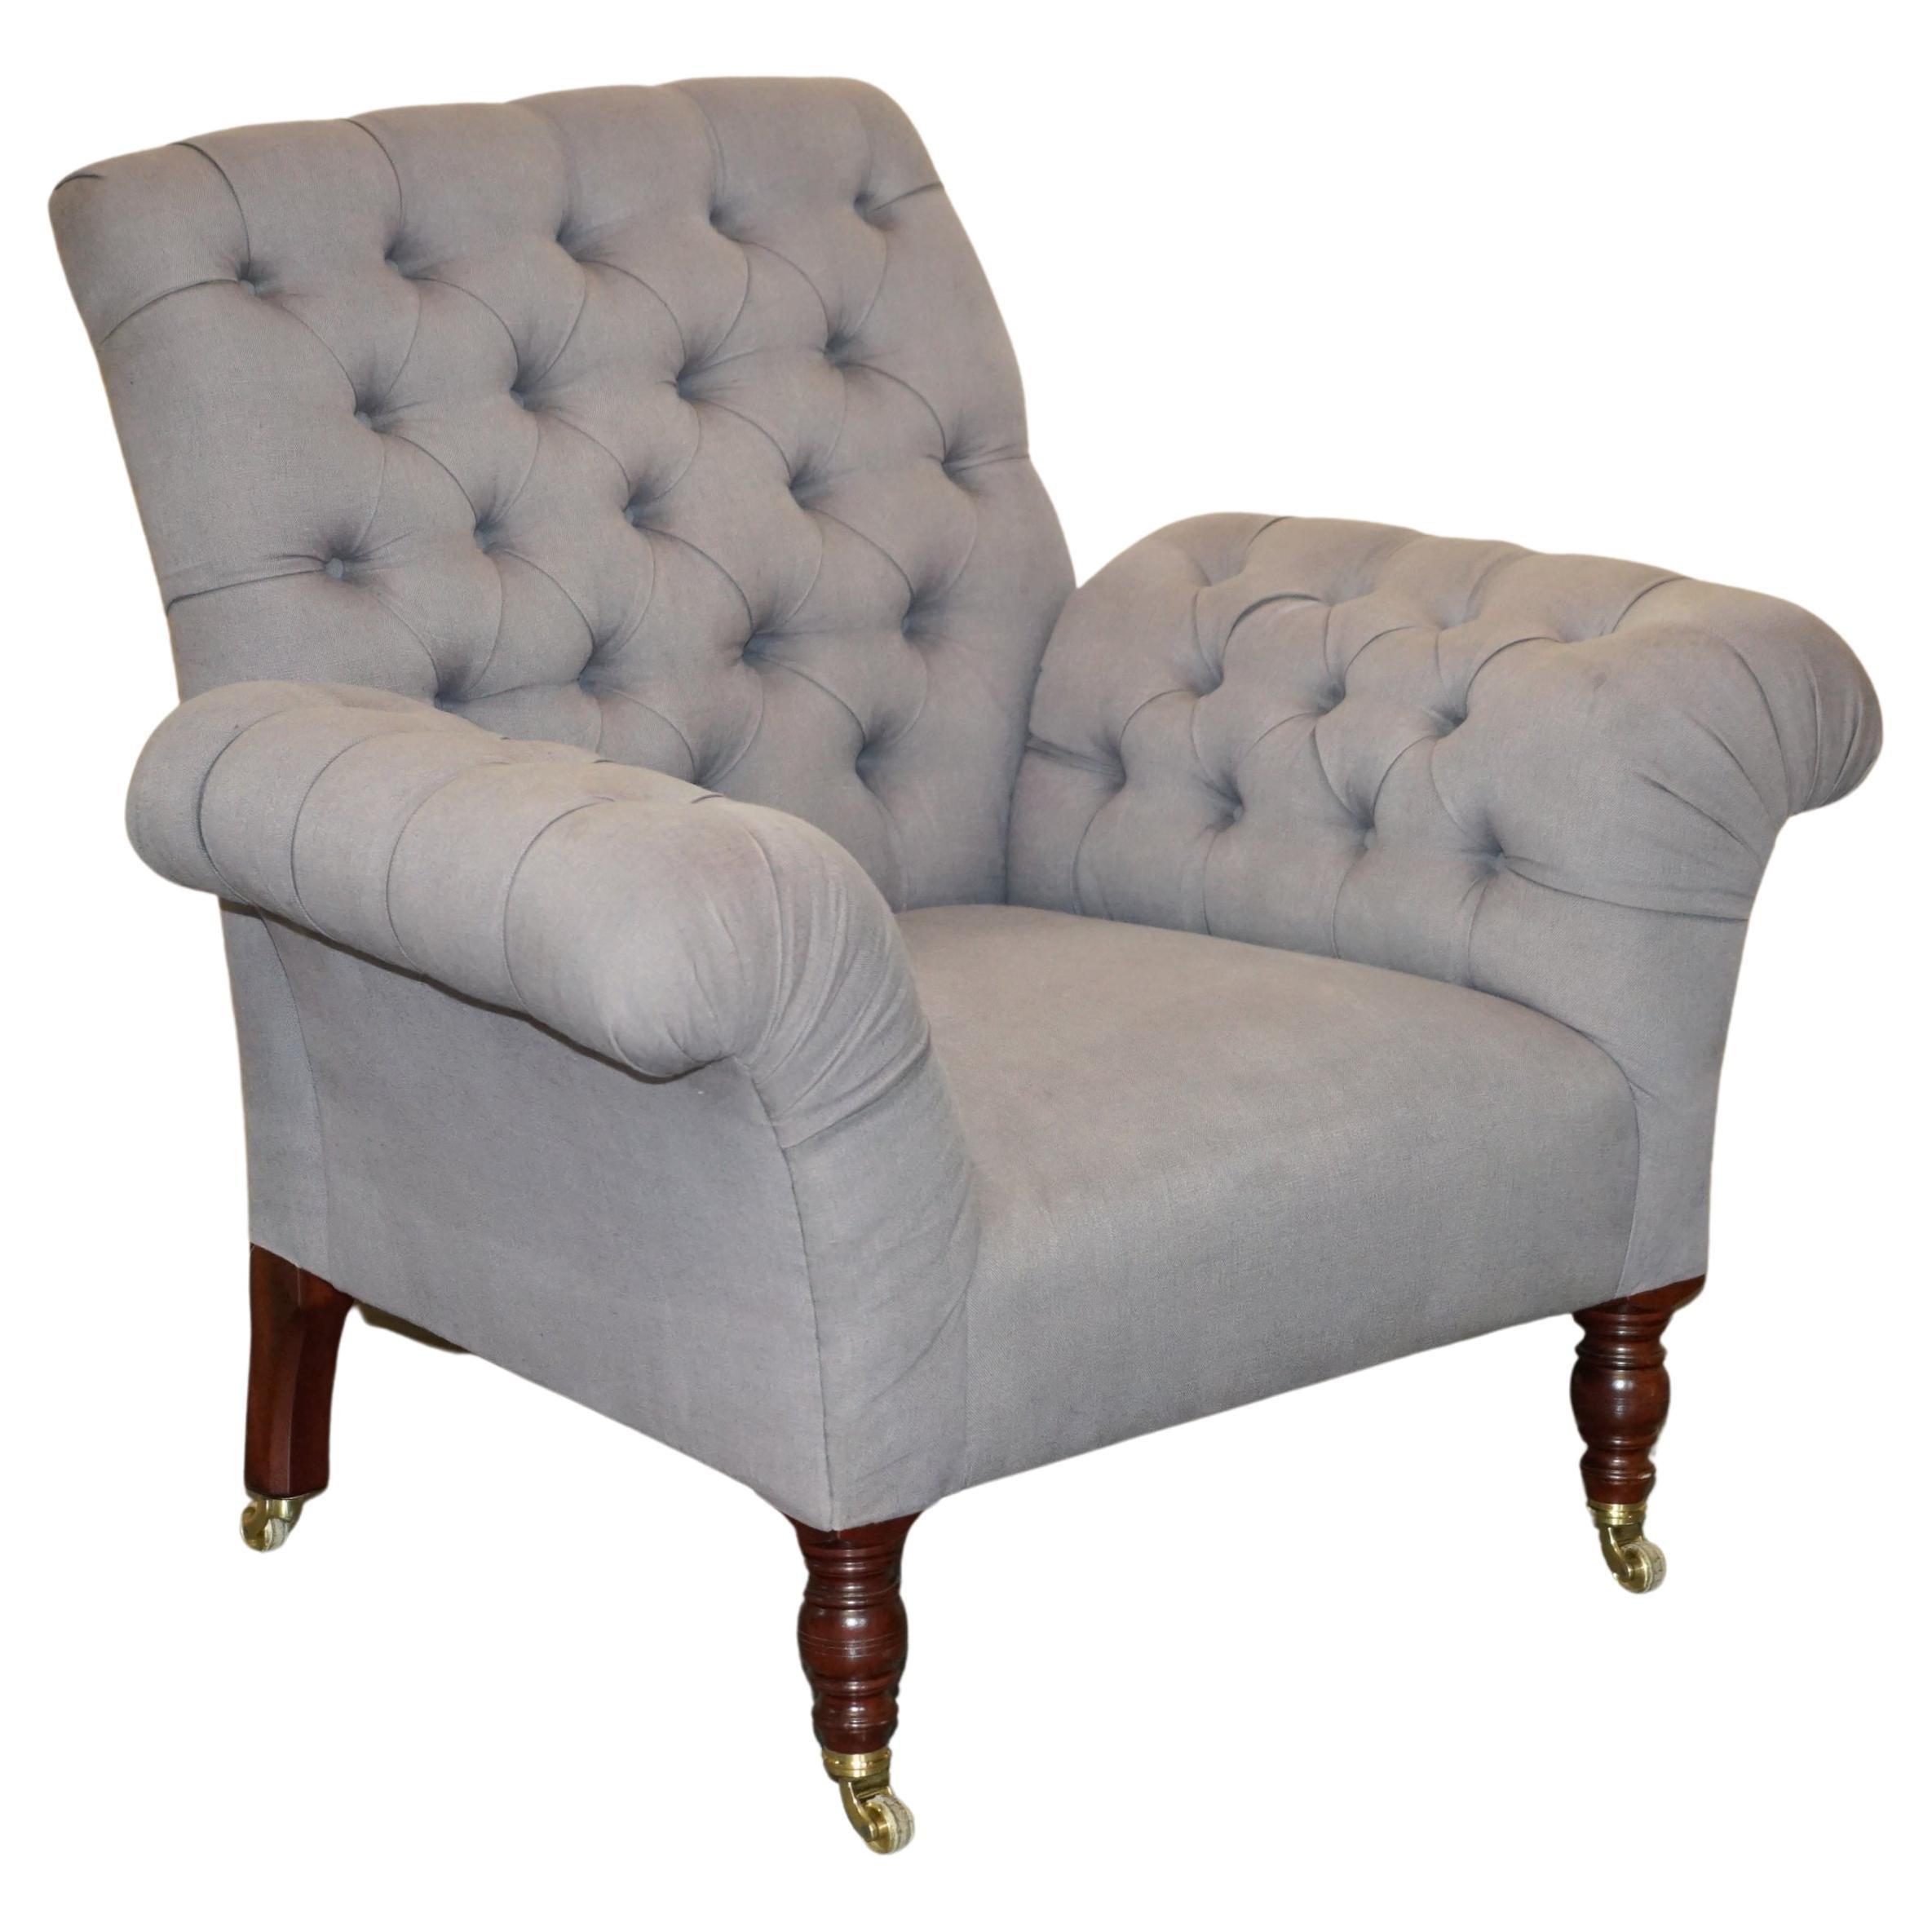 GEORGE SMITH CHELSEA BUTTERFLY GREY OATMEAL CHESTERFIELD ARMCHAiR For Sale